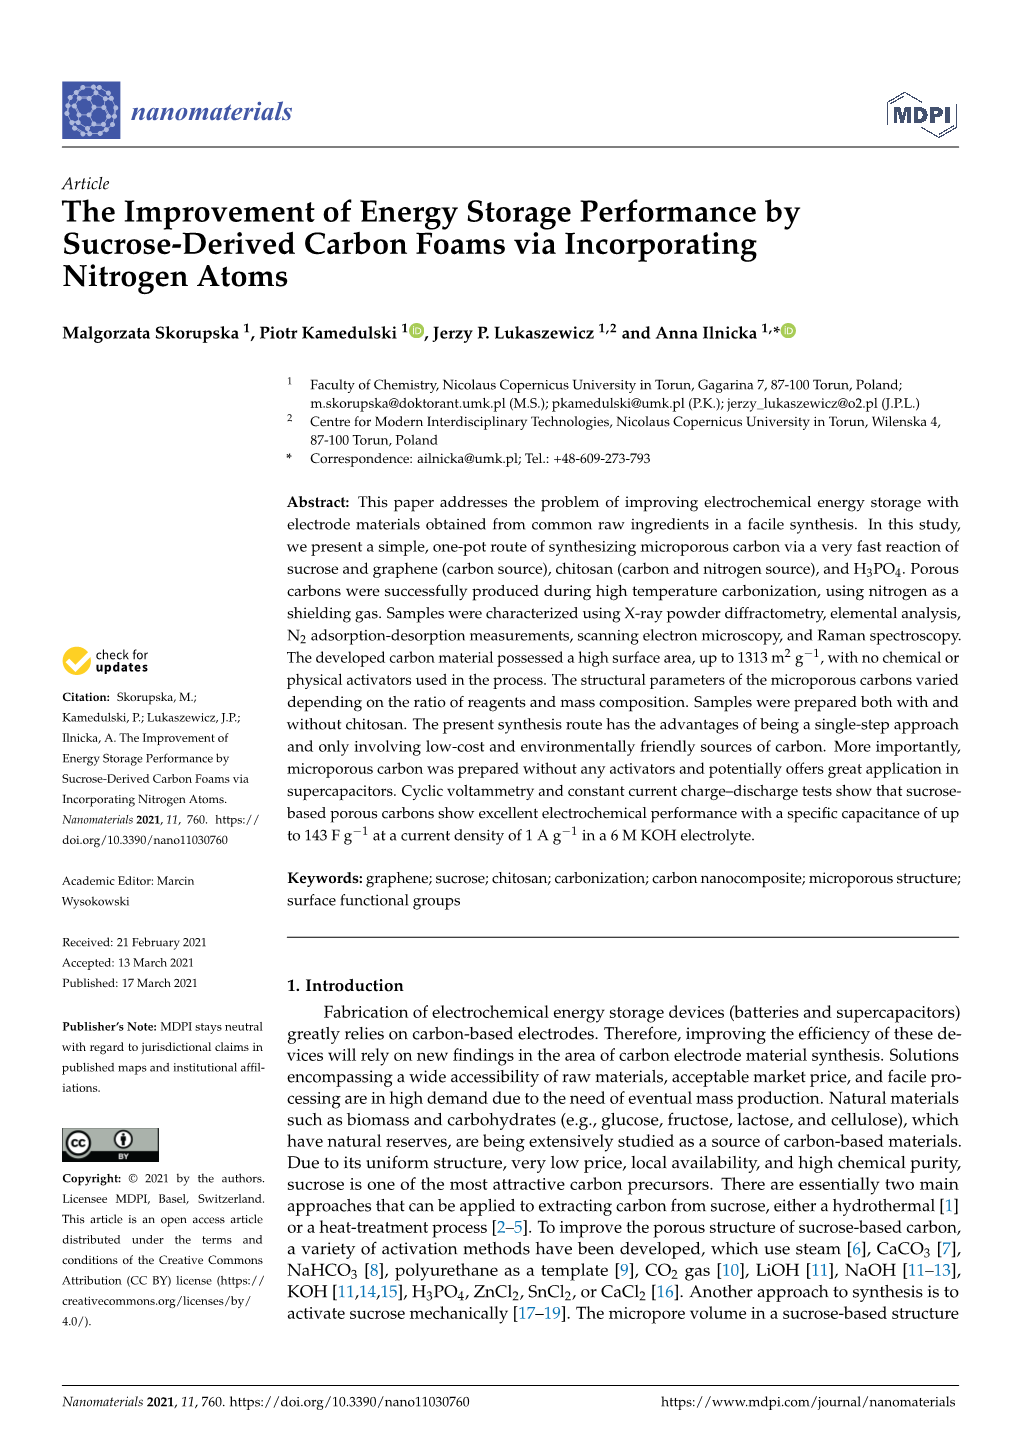 The Improvement of Energy Storage Performance by Sucrose-Derived Carbon Foams Via Incorporating Nitrogen Atoms